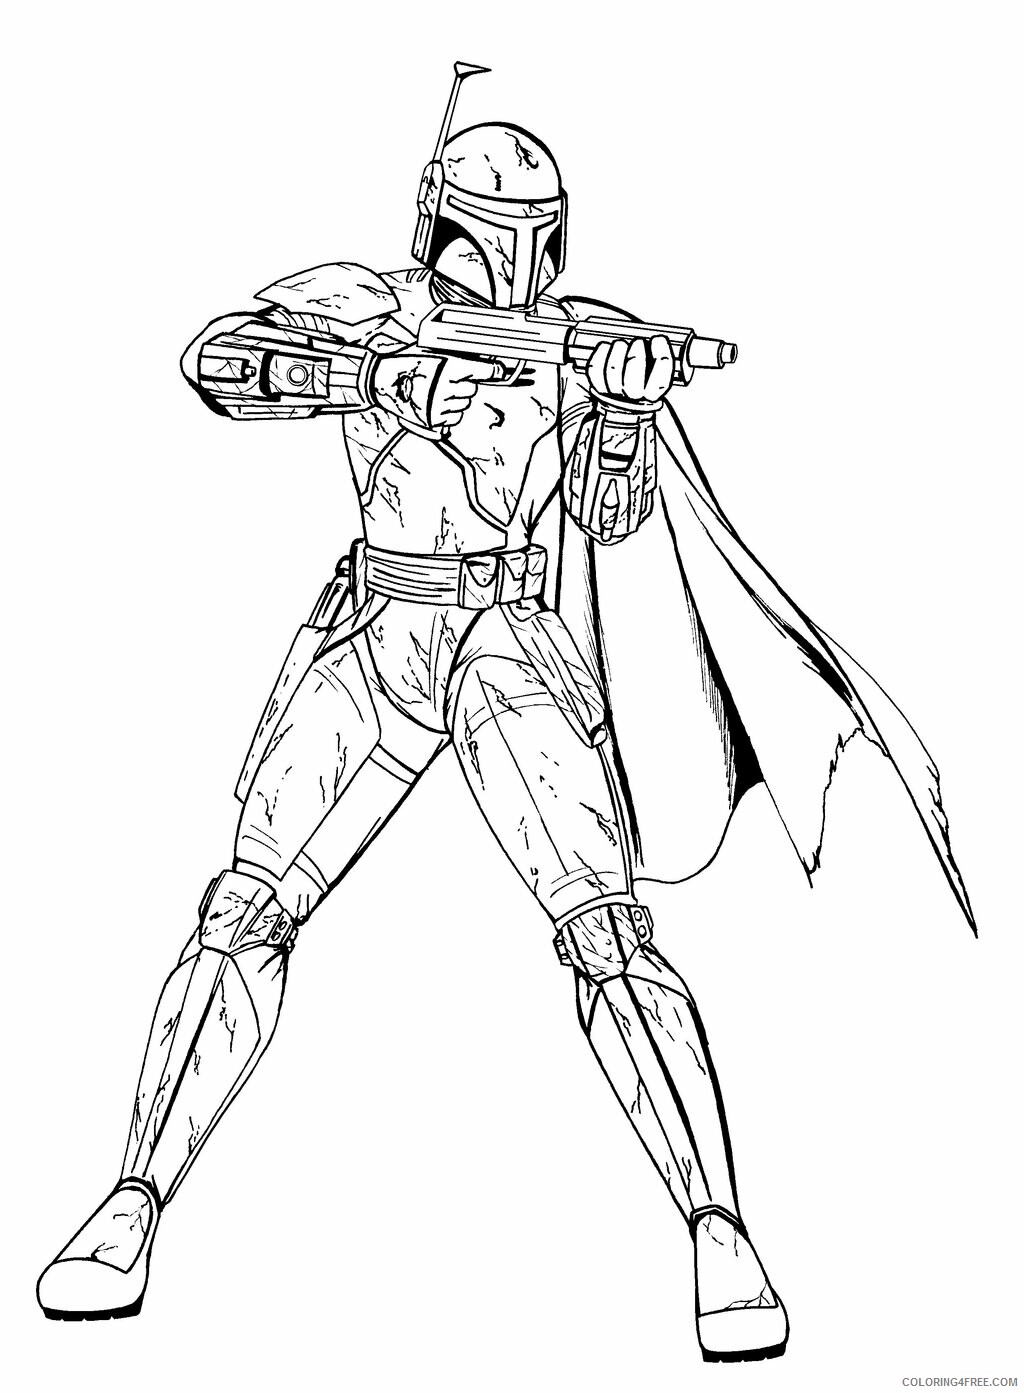 Star Wars Coloring Pages TV Film Star Wars Printable 2020 07774 Coloring4free